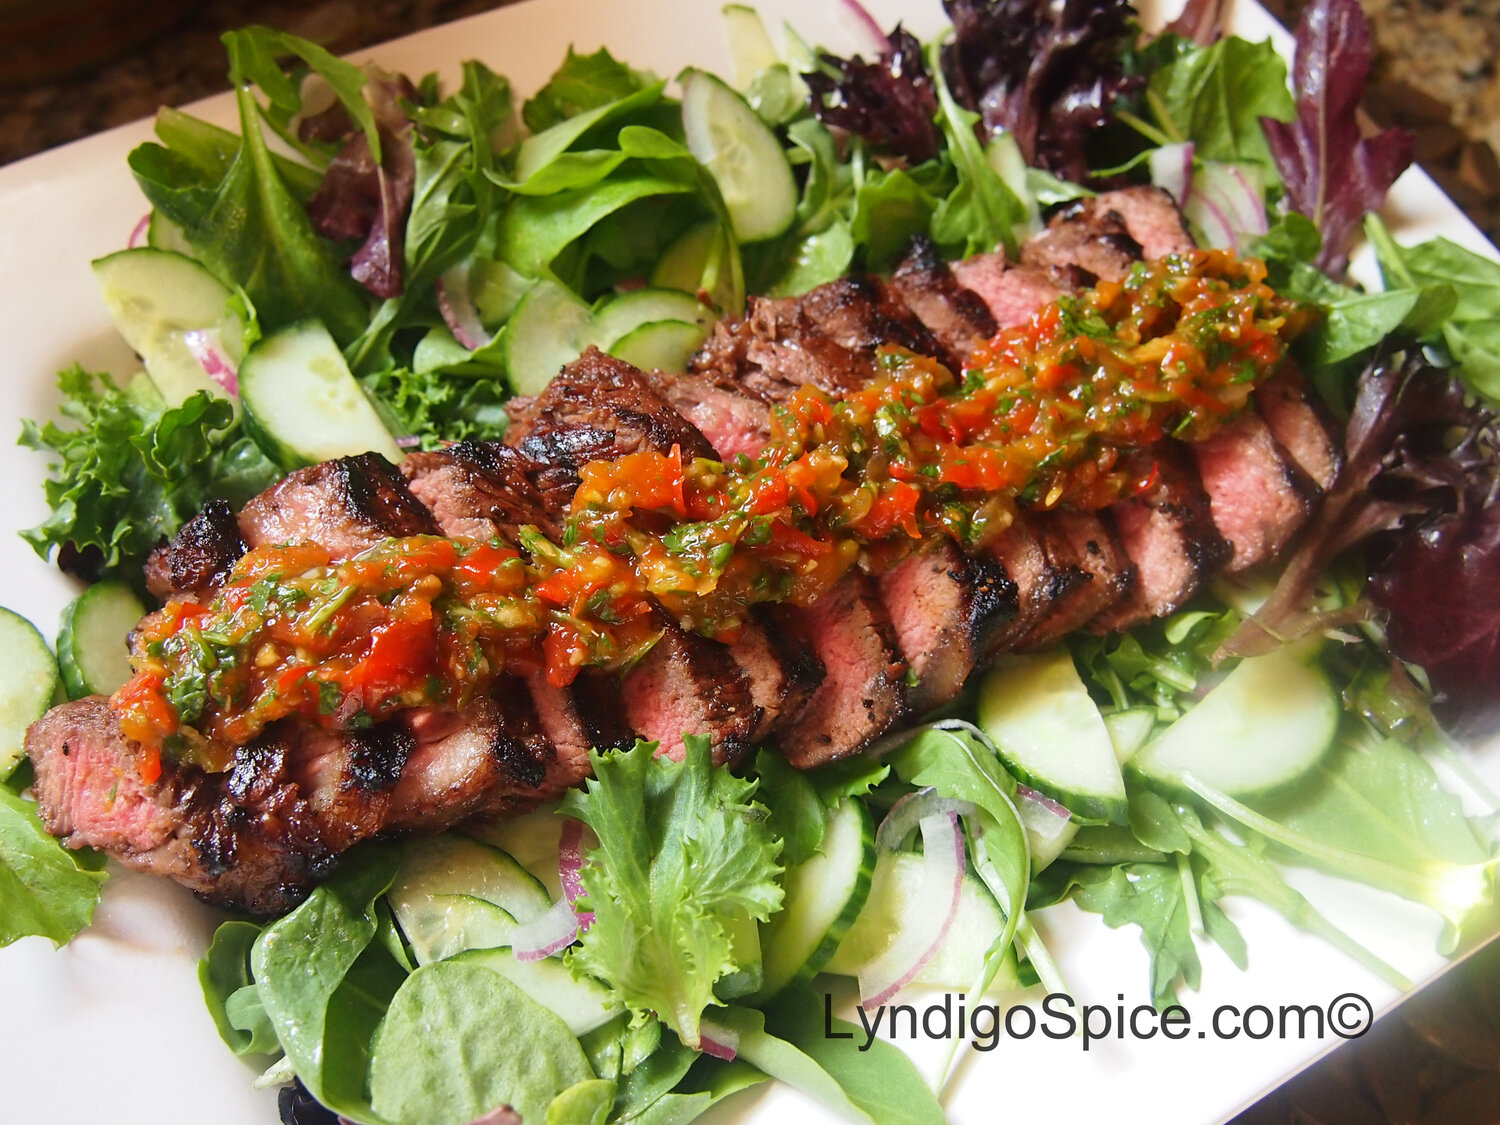 Grilled Steak with Spicy Red Pepper Relish mixed with organic cilantro